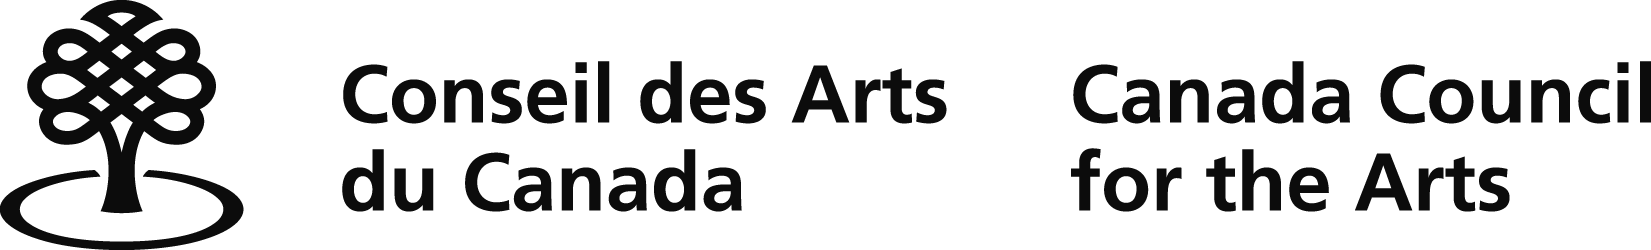 logo of the canada council for the arts